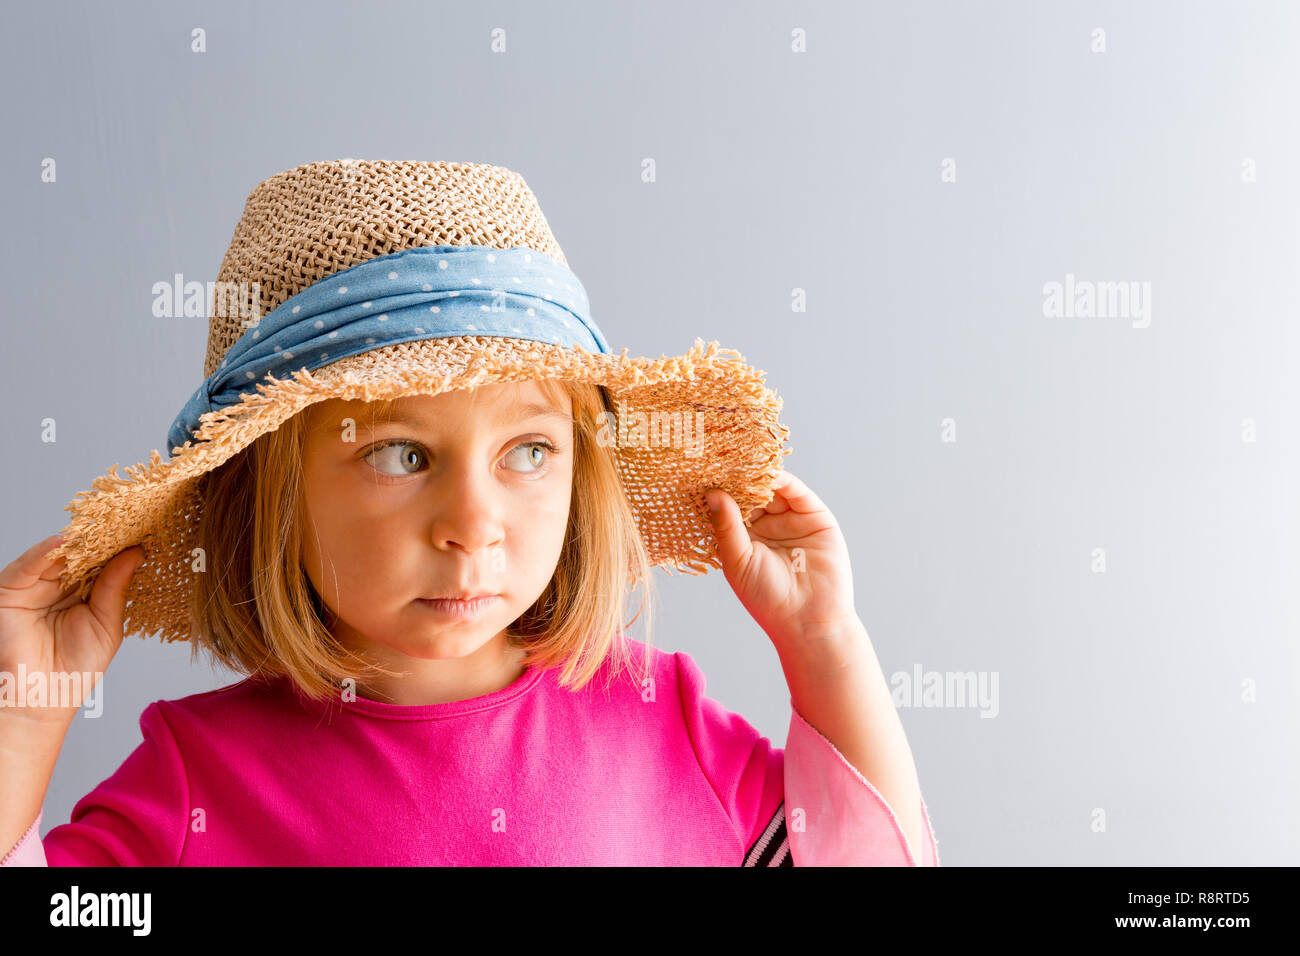 Young pretty girl in pink dress and rural straw hat looking away to the side of copy space on plain grey wall background, while holding her hat with b Stock Photo